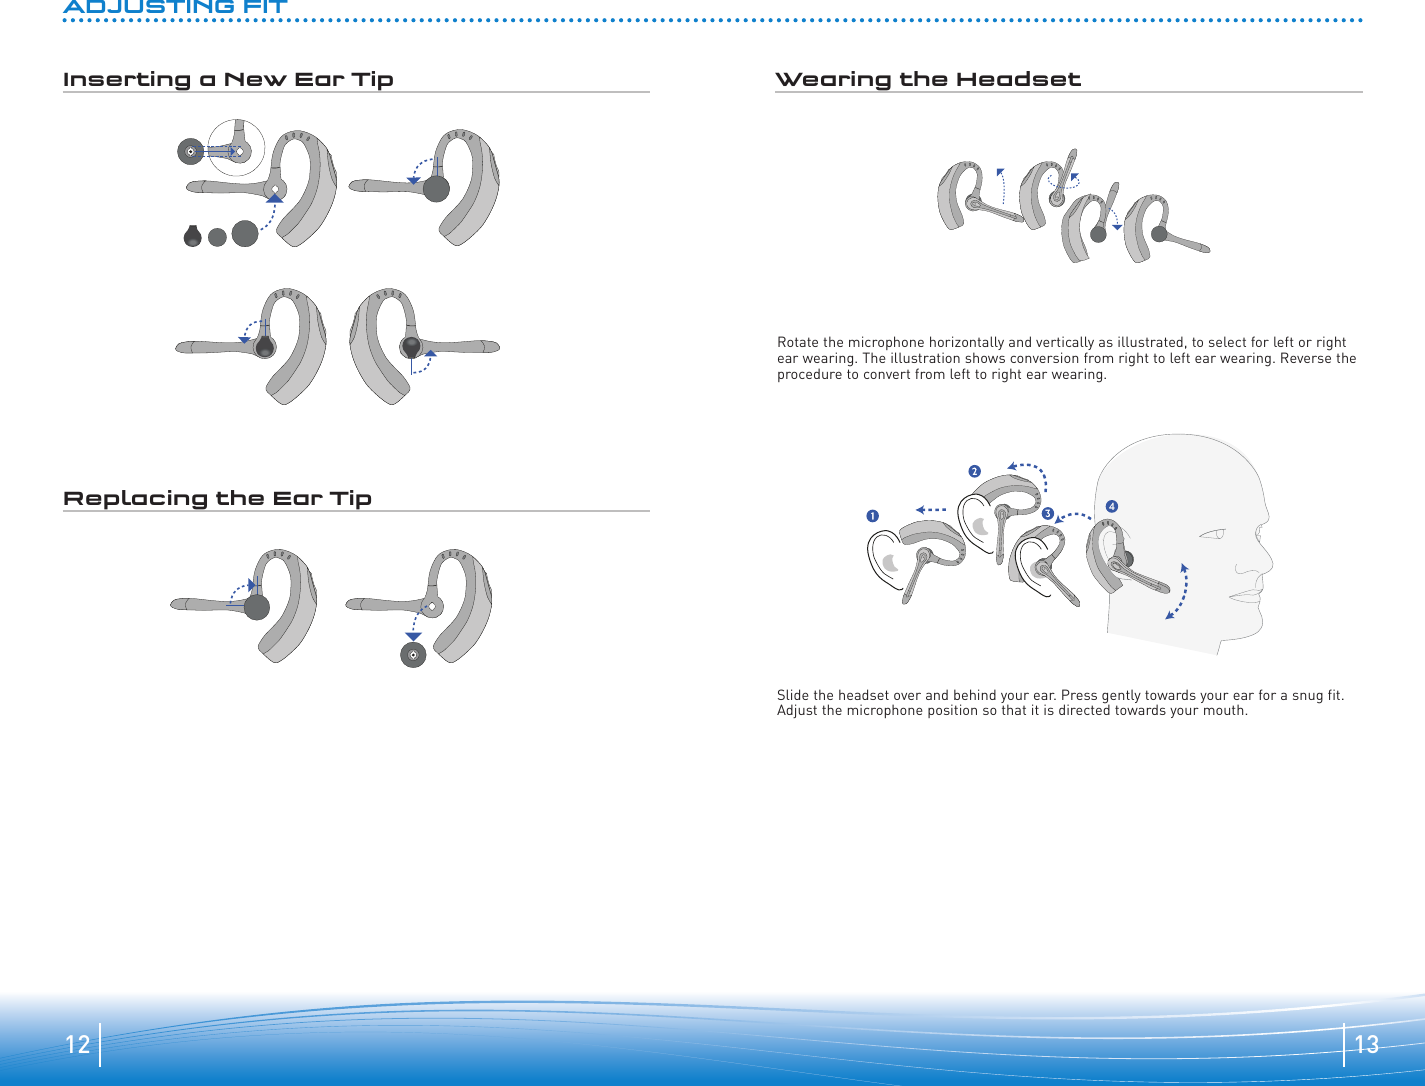 1312Replacing the Ear TipRotate the microphone horizontally and vertically as illustrated, to select for left or right ear wearing. The illustration shows conversion from right to left ear wearing. Reverse the procedure to convert from left to right ear wearing.Slide the headset over and behind your ear. Press gently towards your ear for a snug fit. Adjust the microphone position so that it is directed towards your mouth.Inserting a New Ear TipADJUSTING FITWearing the Headset